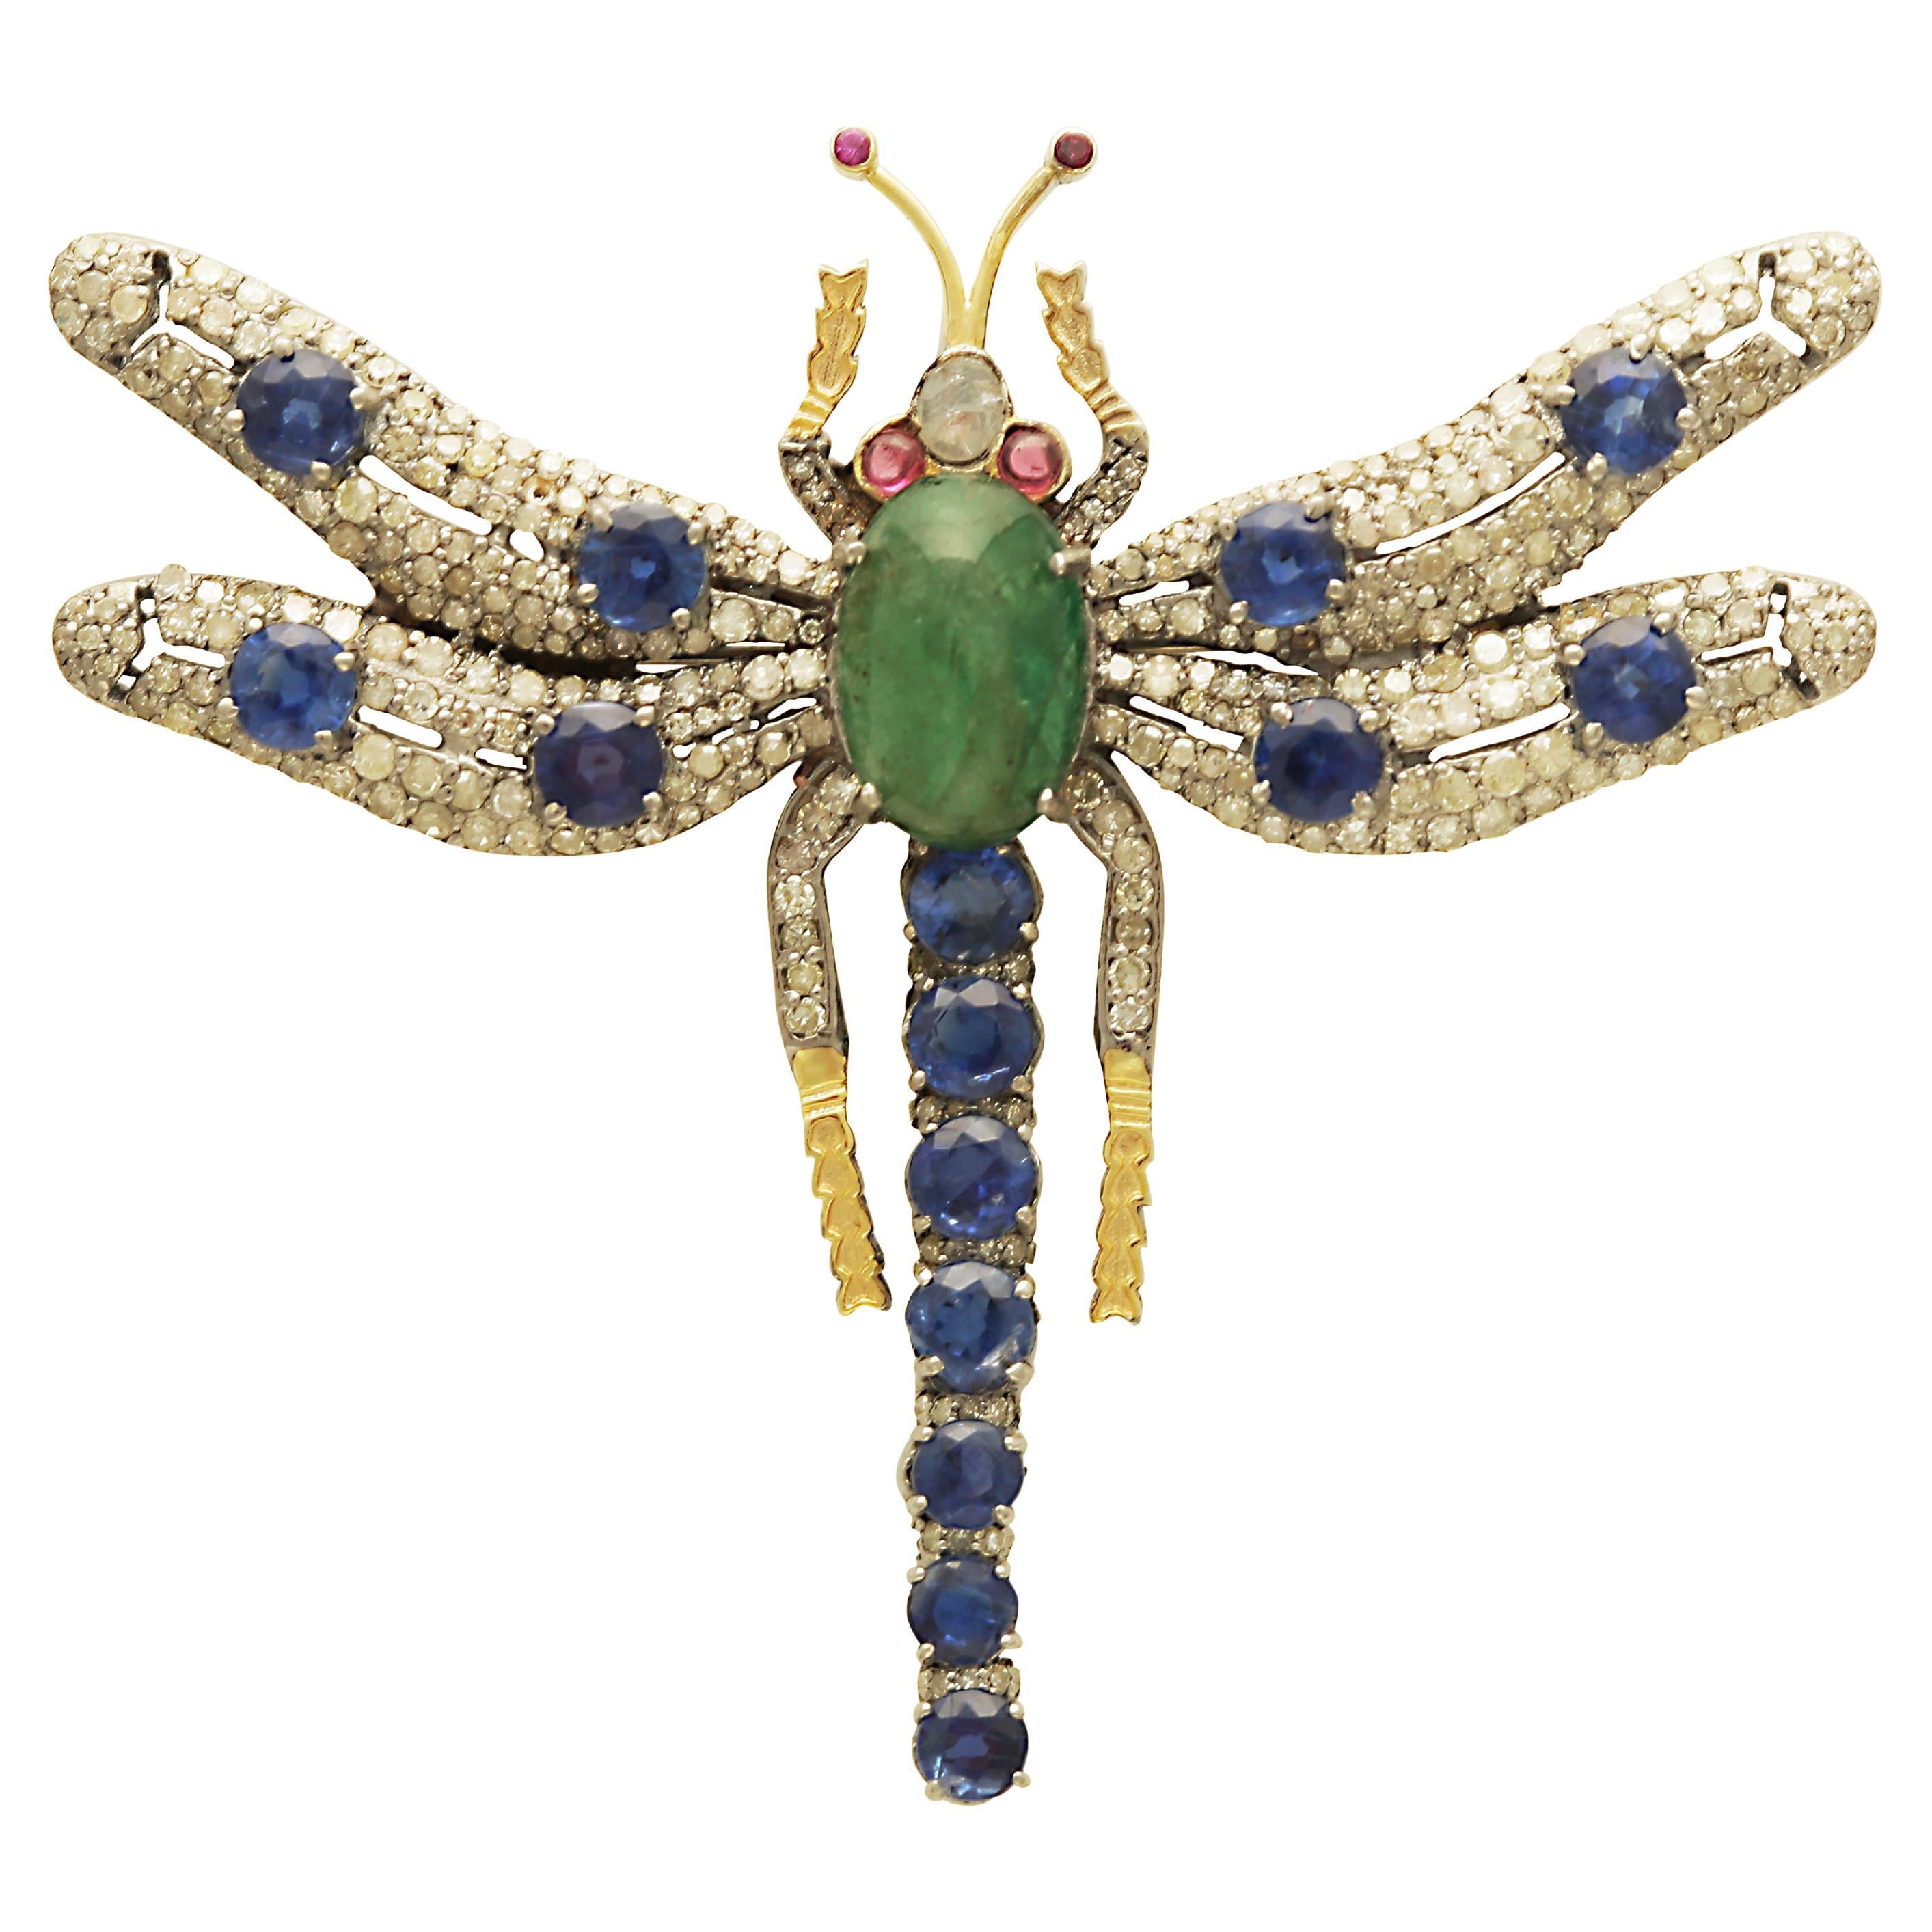 Victorian Inspired Dragonfly Brooch/Pendant with Diamond, Emerald & Kyanite